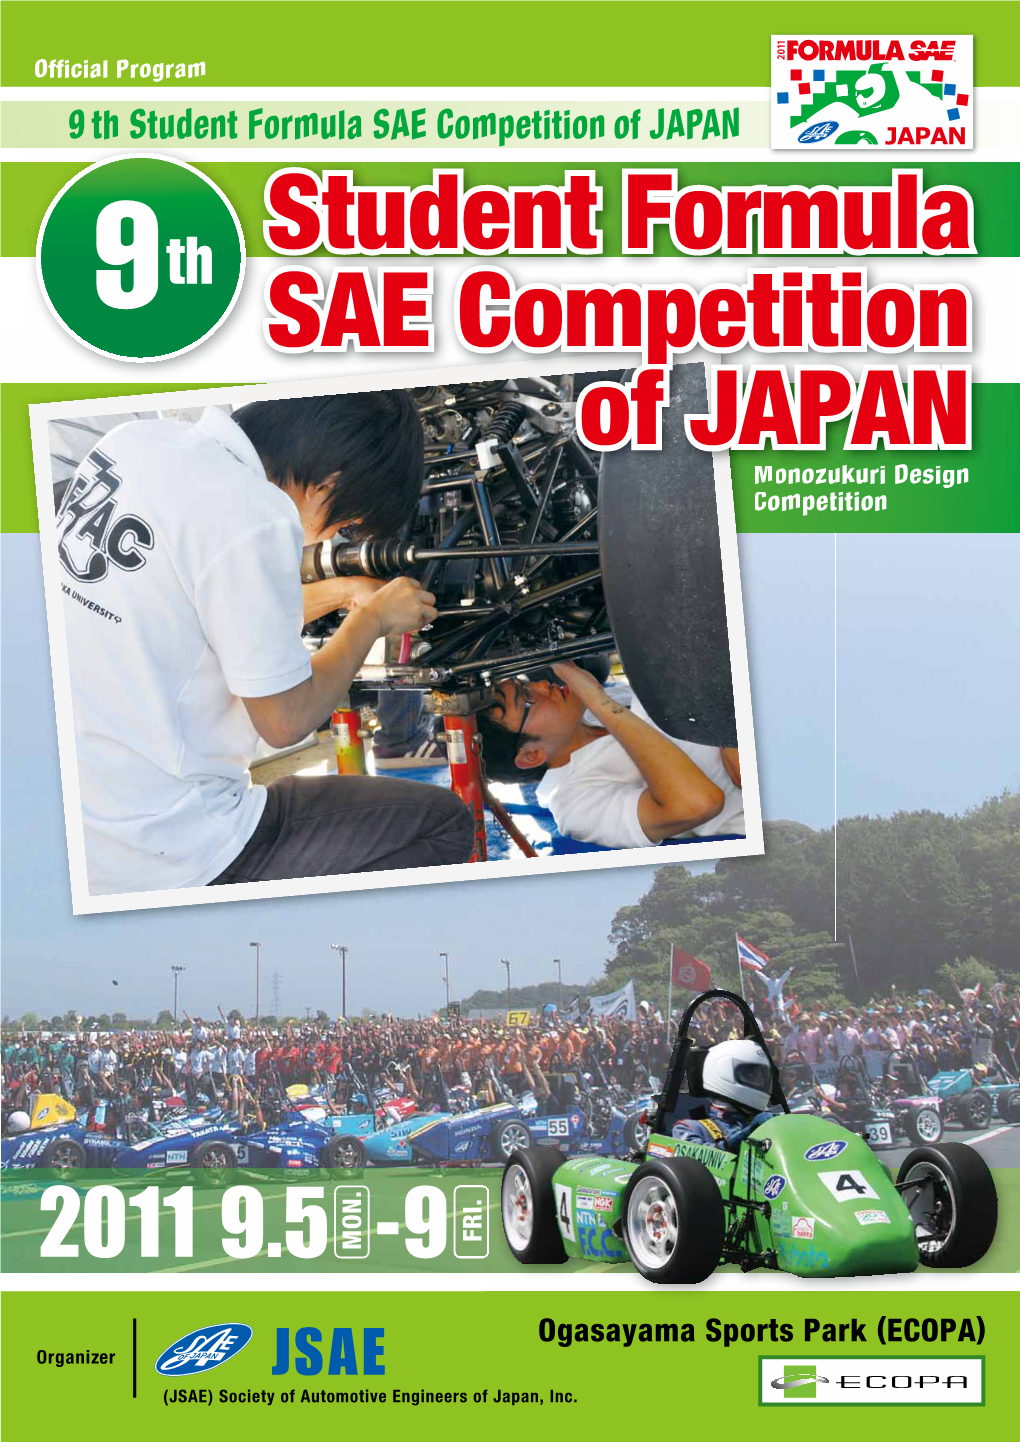 9 Th Student Formula SAE Competition of JAPAN